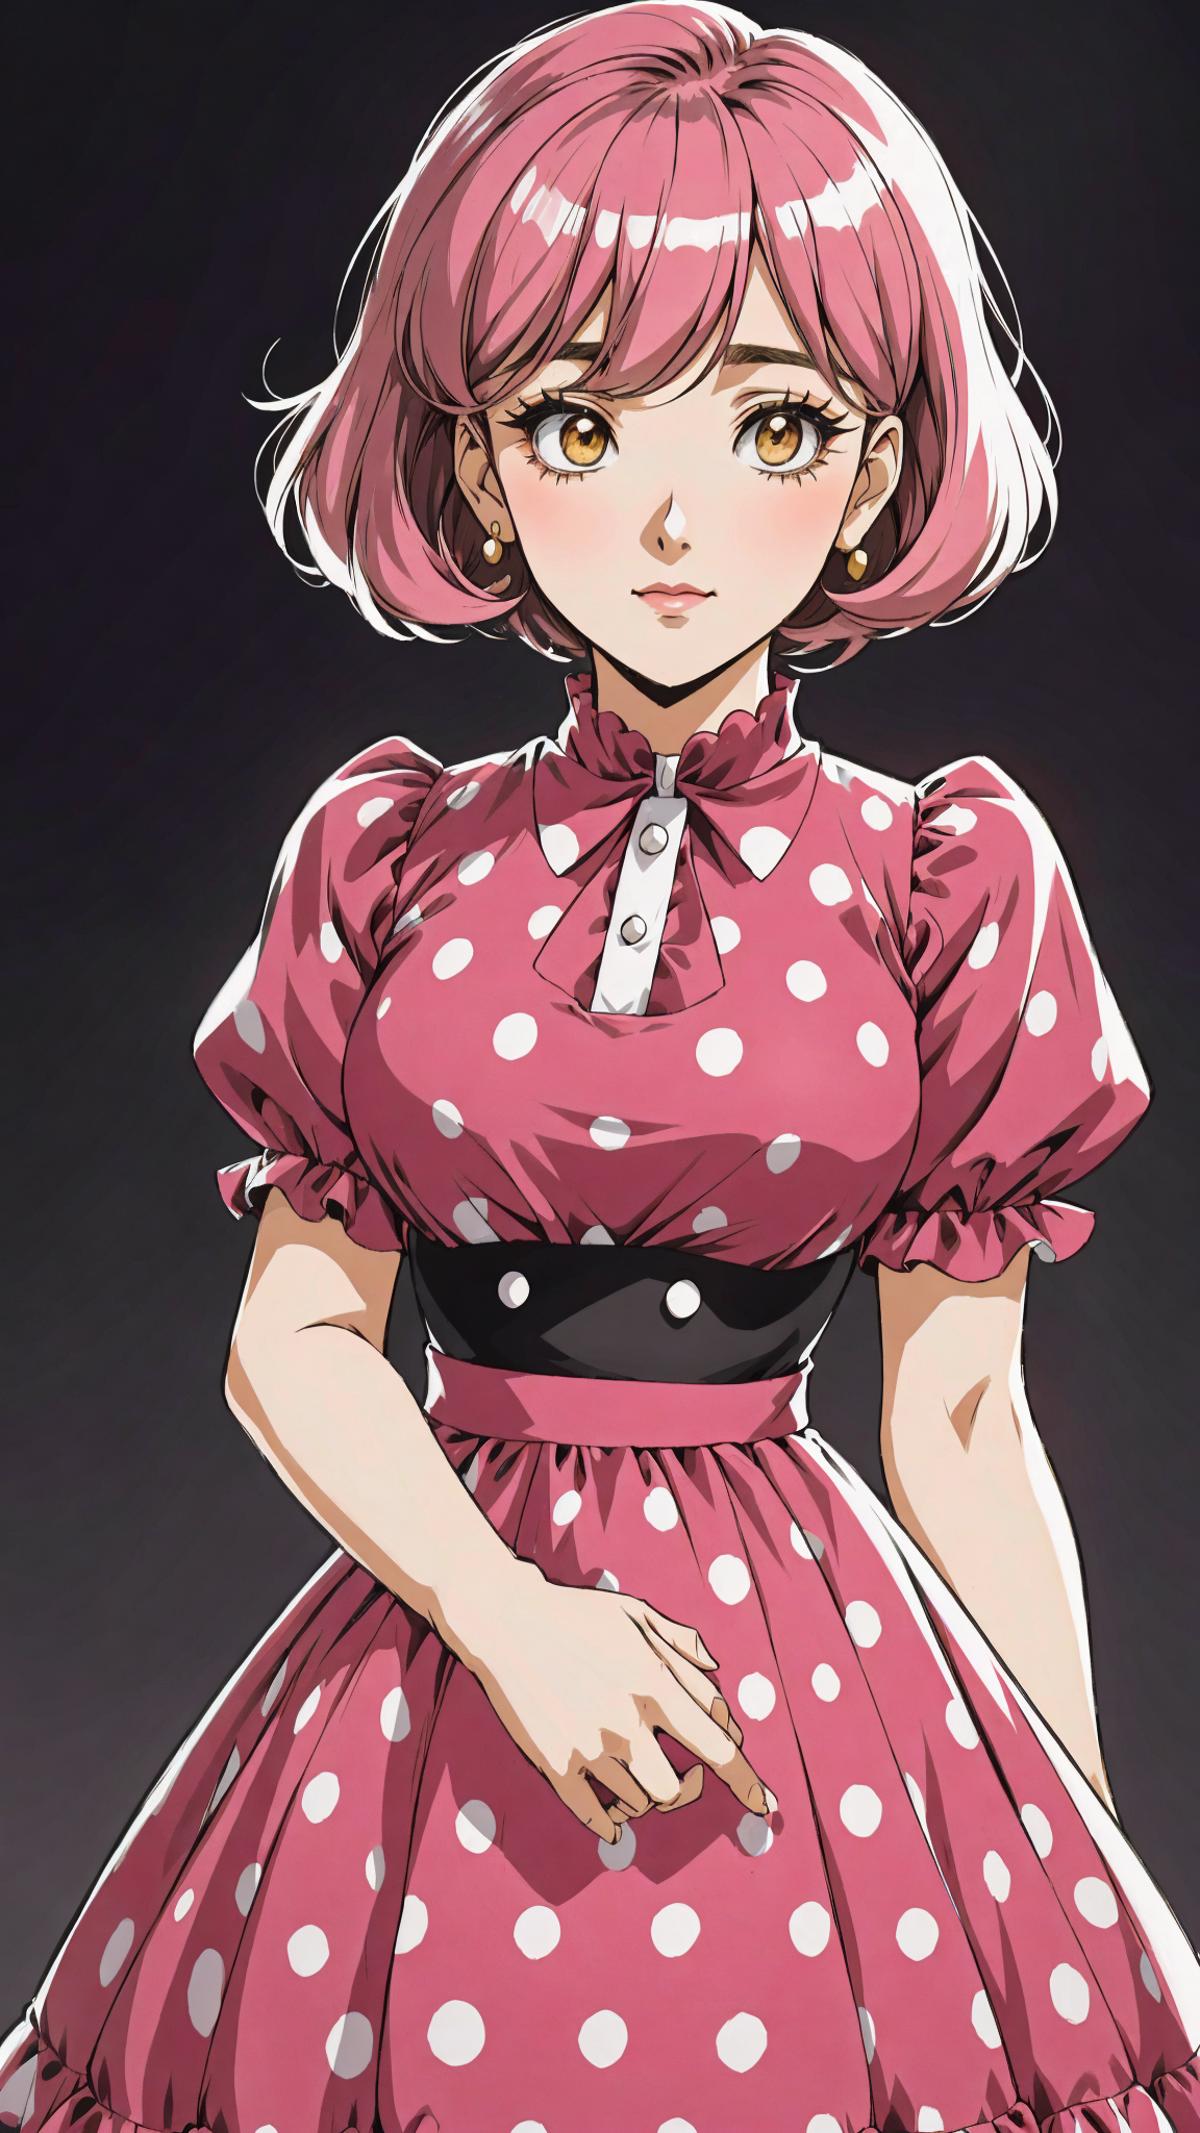 A pink-haired woman wearing a polka dot dress and a black bow tie.